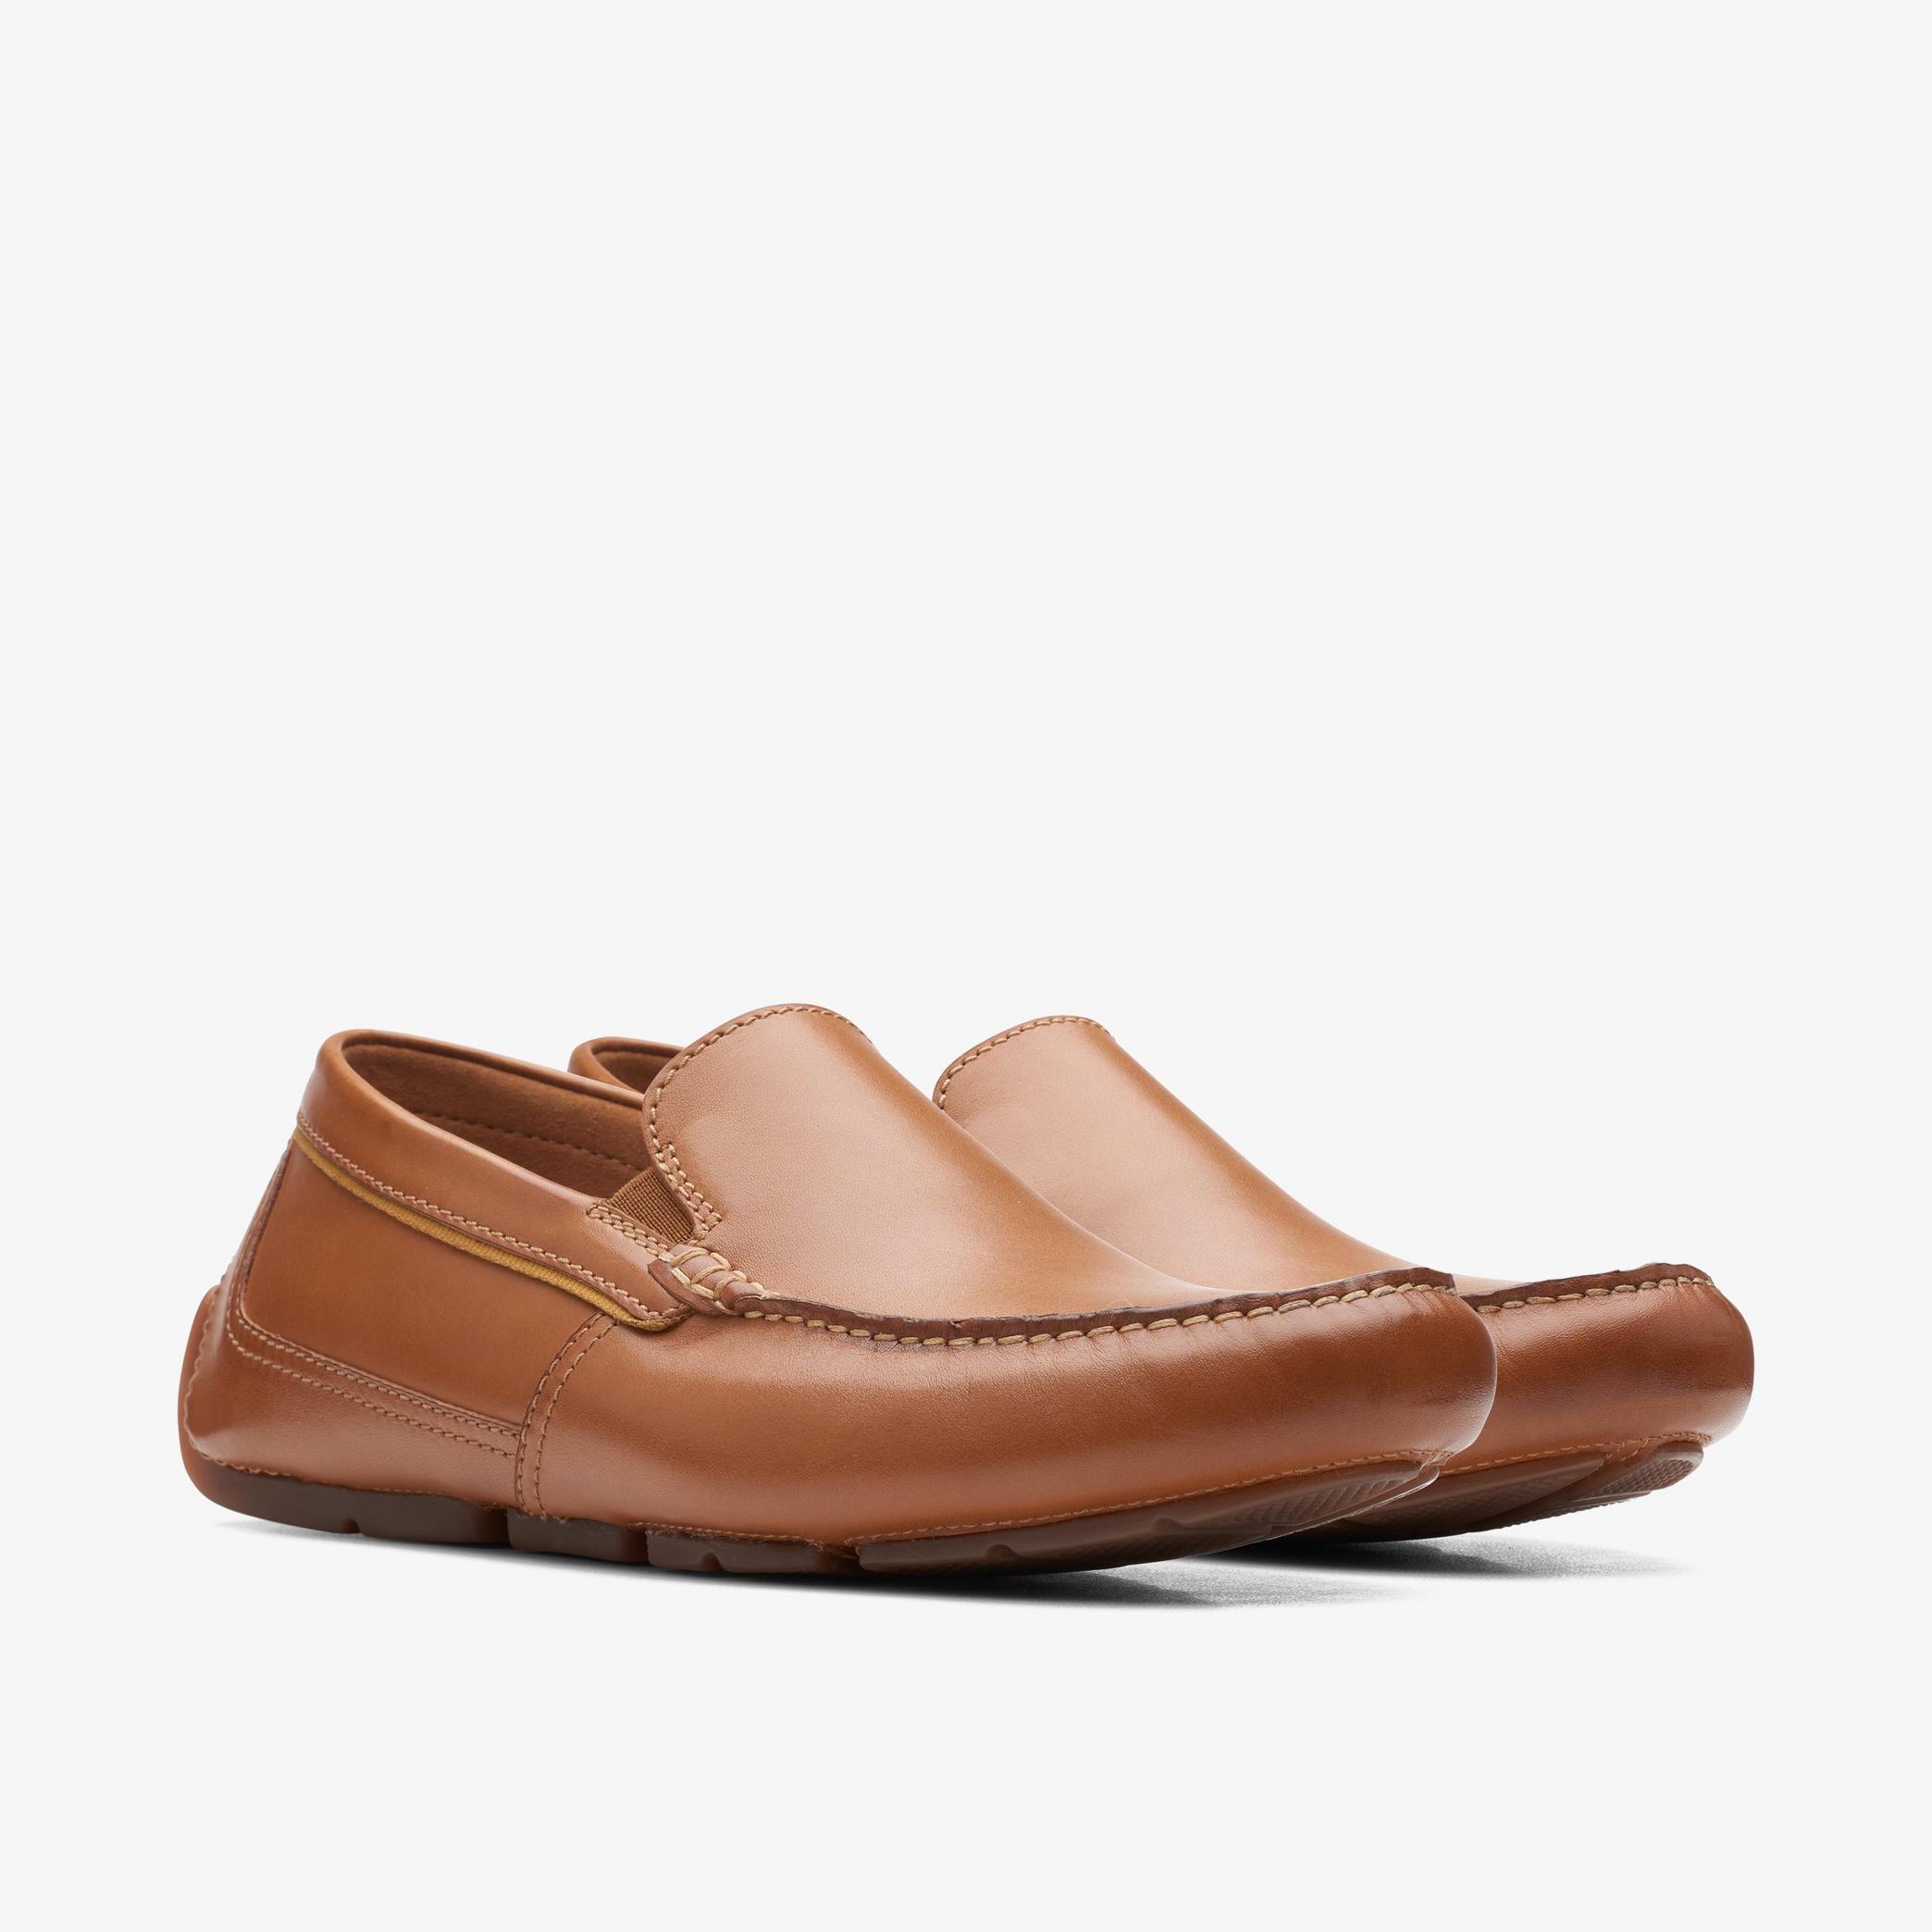 Markman Plain Tan Leather Loafers, view 4 of 6